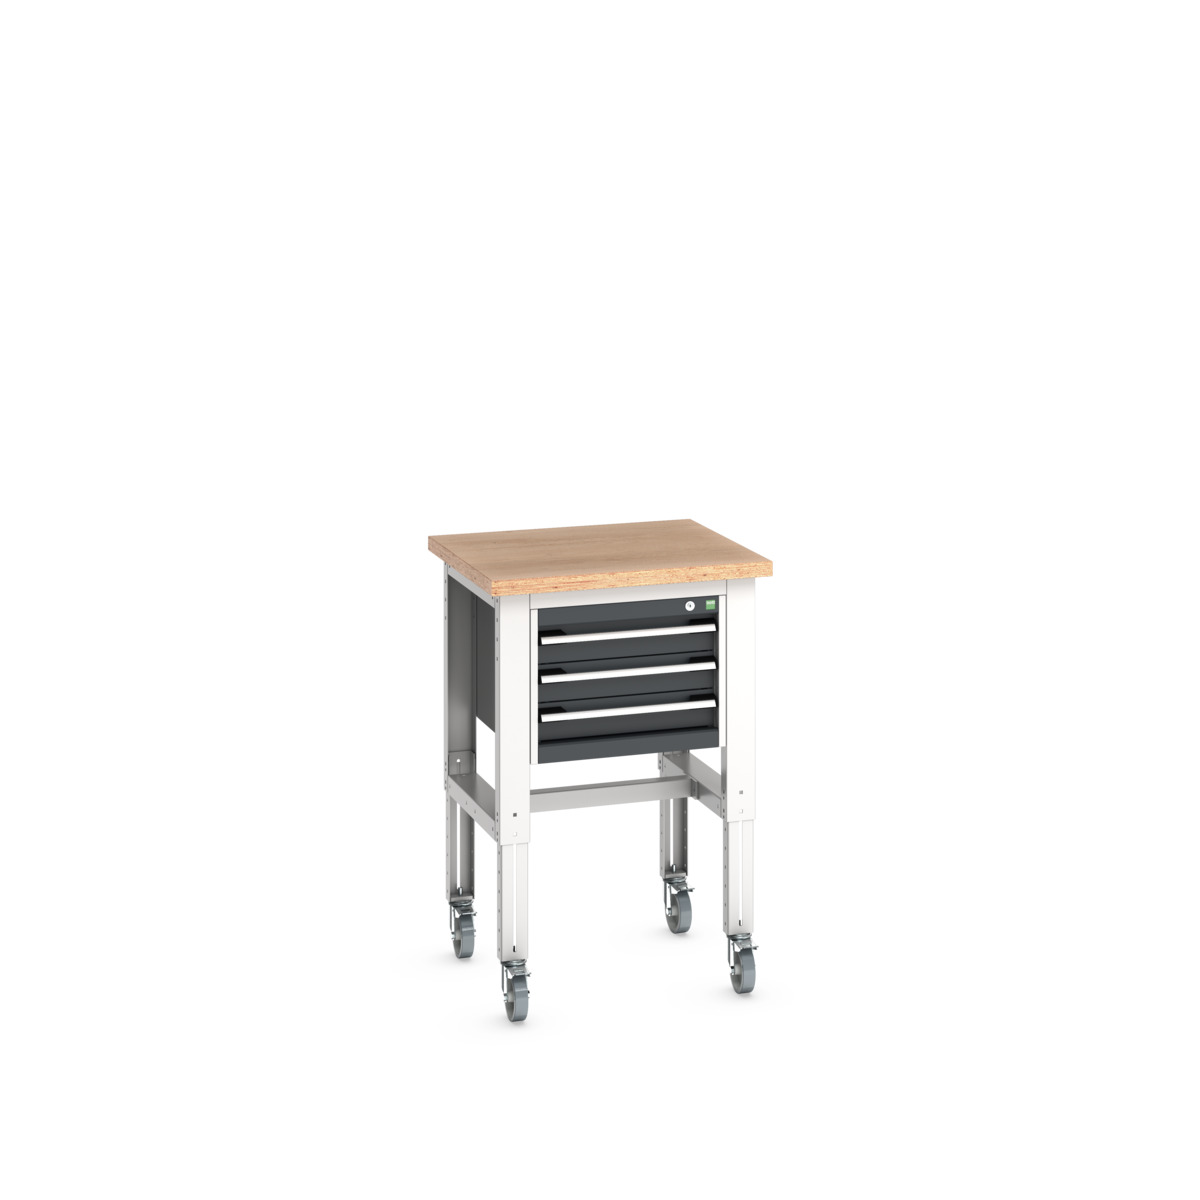 41003527.19V - cubio mobile bench adj height (mpx)